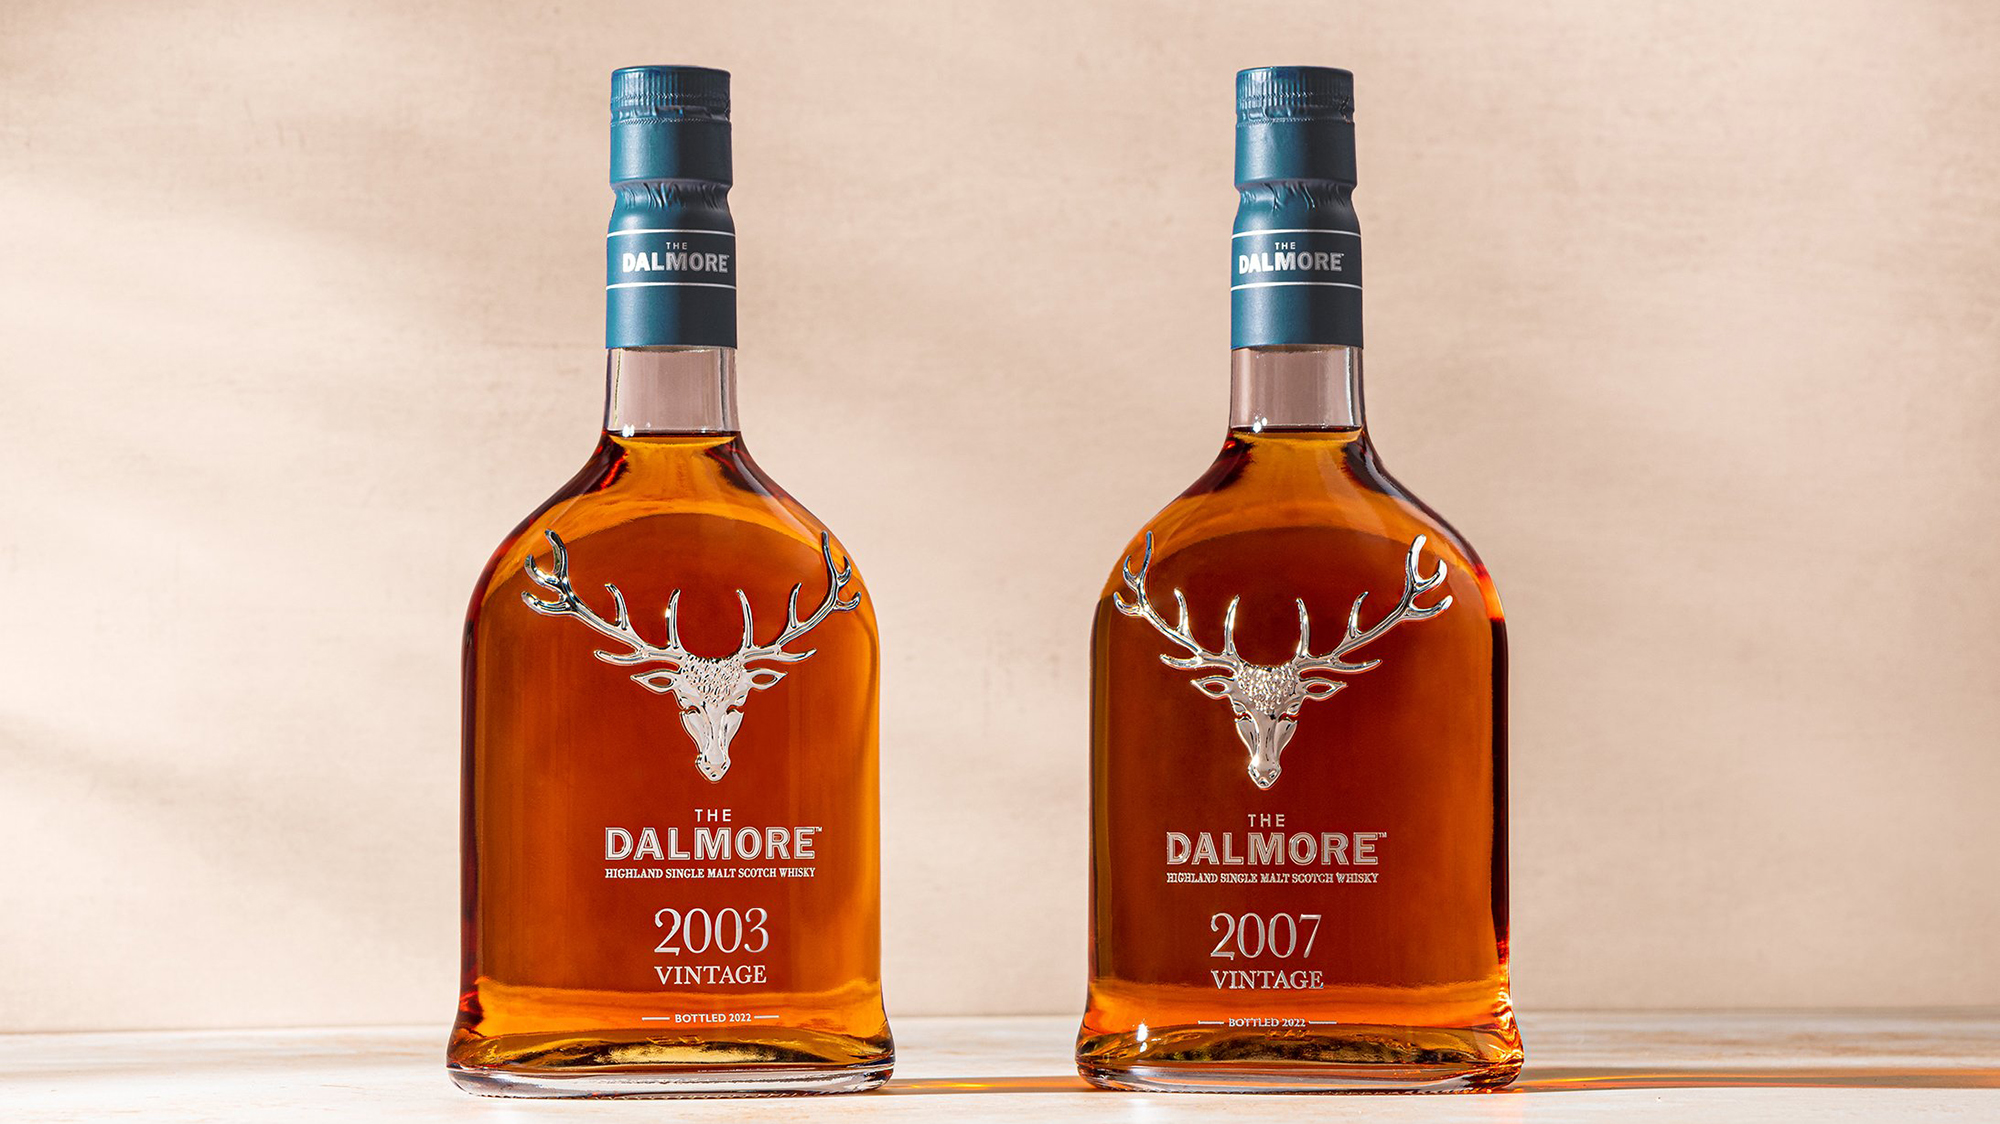 The Dalmore Just Dropped 2003 And 2007 Vintage Scotch Whiskies